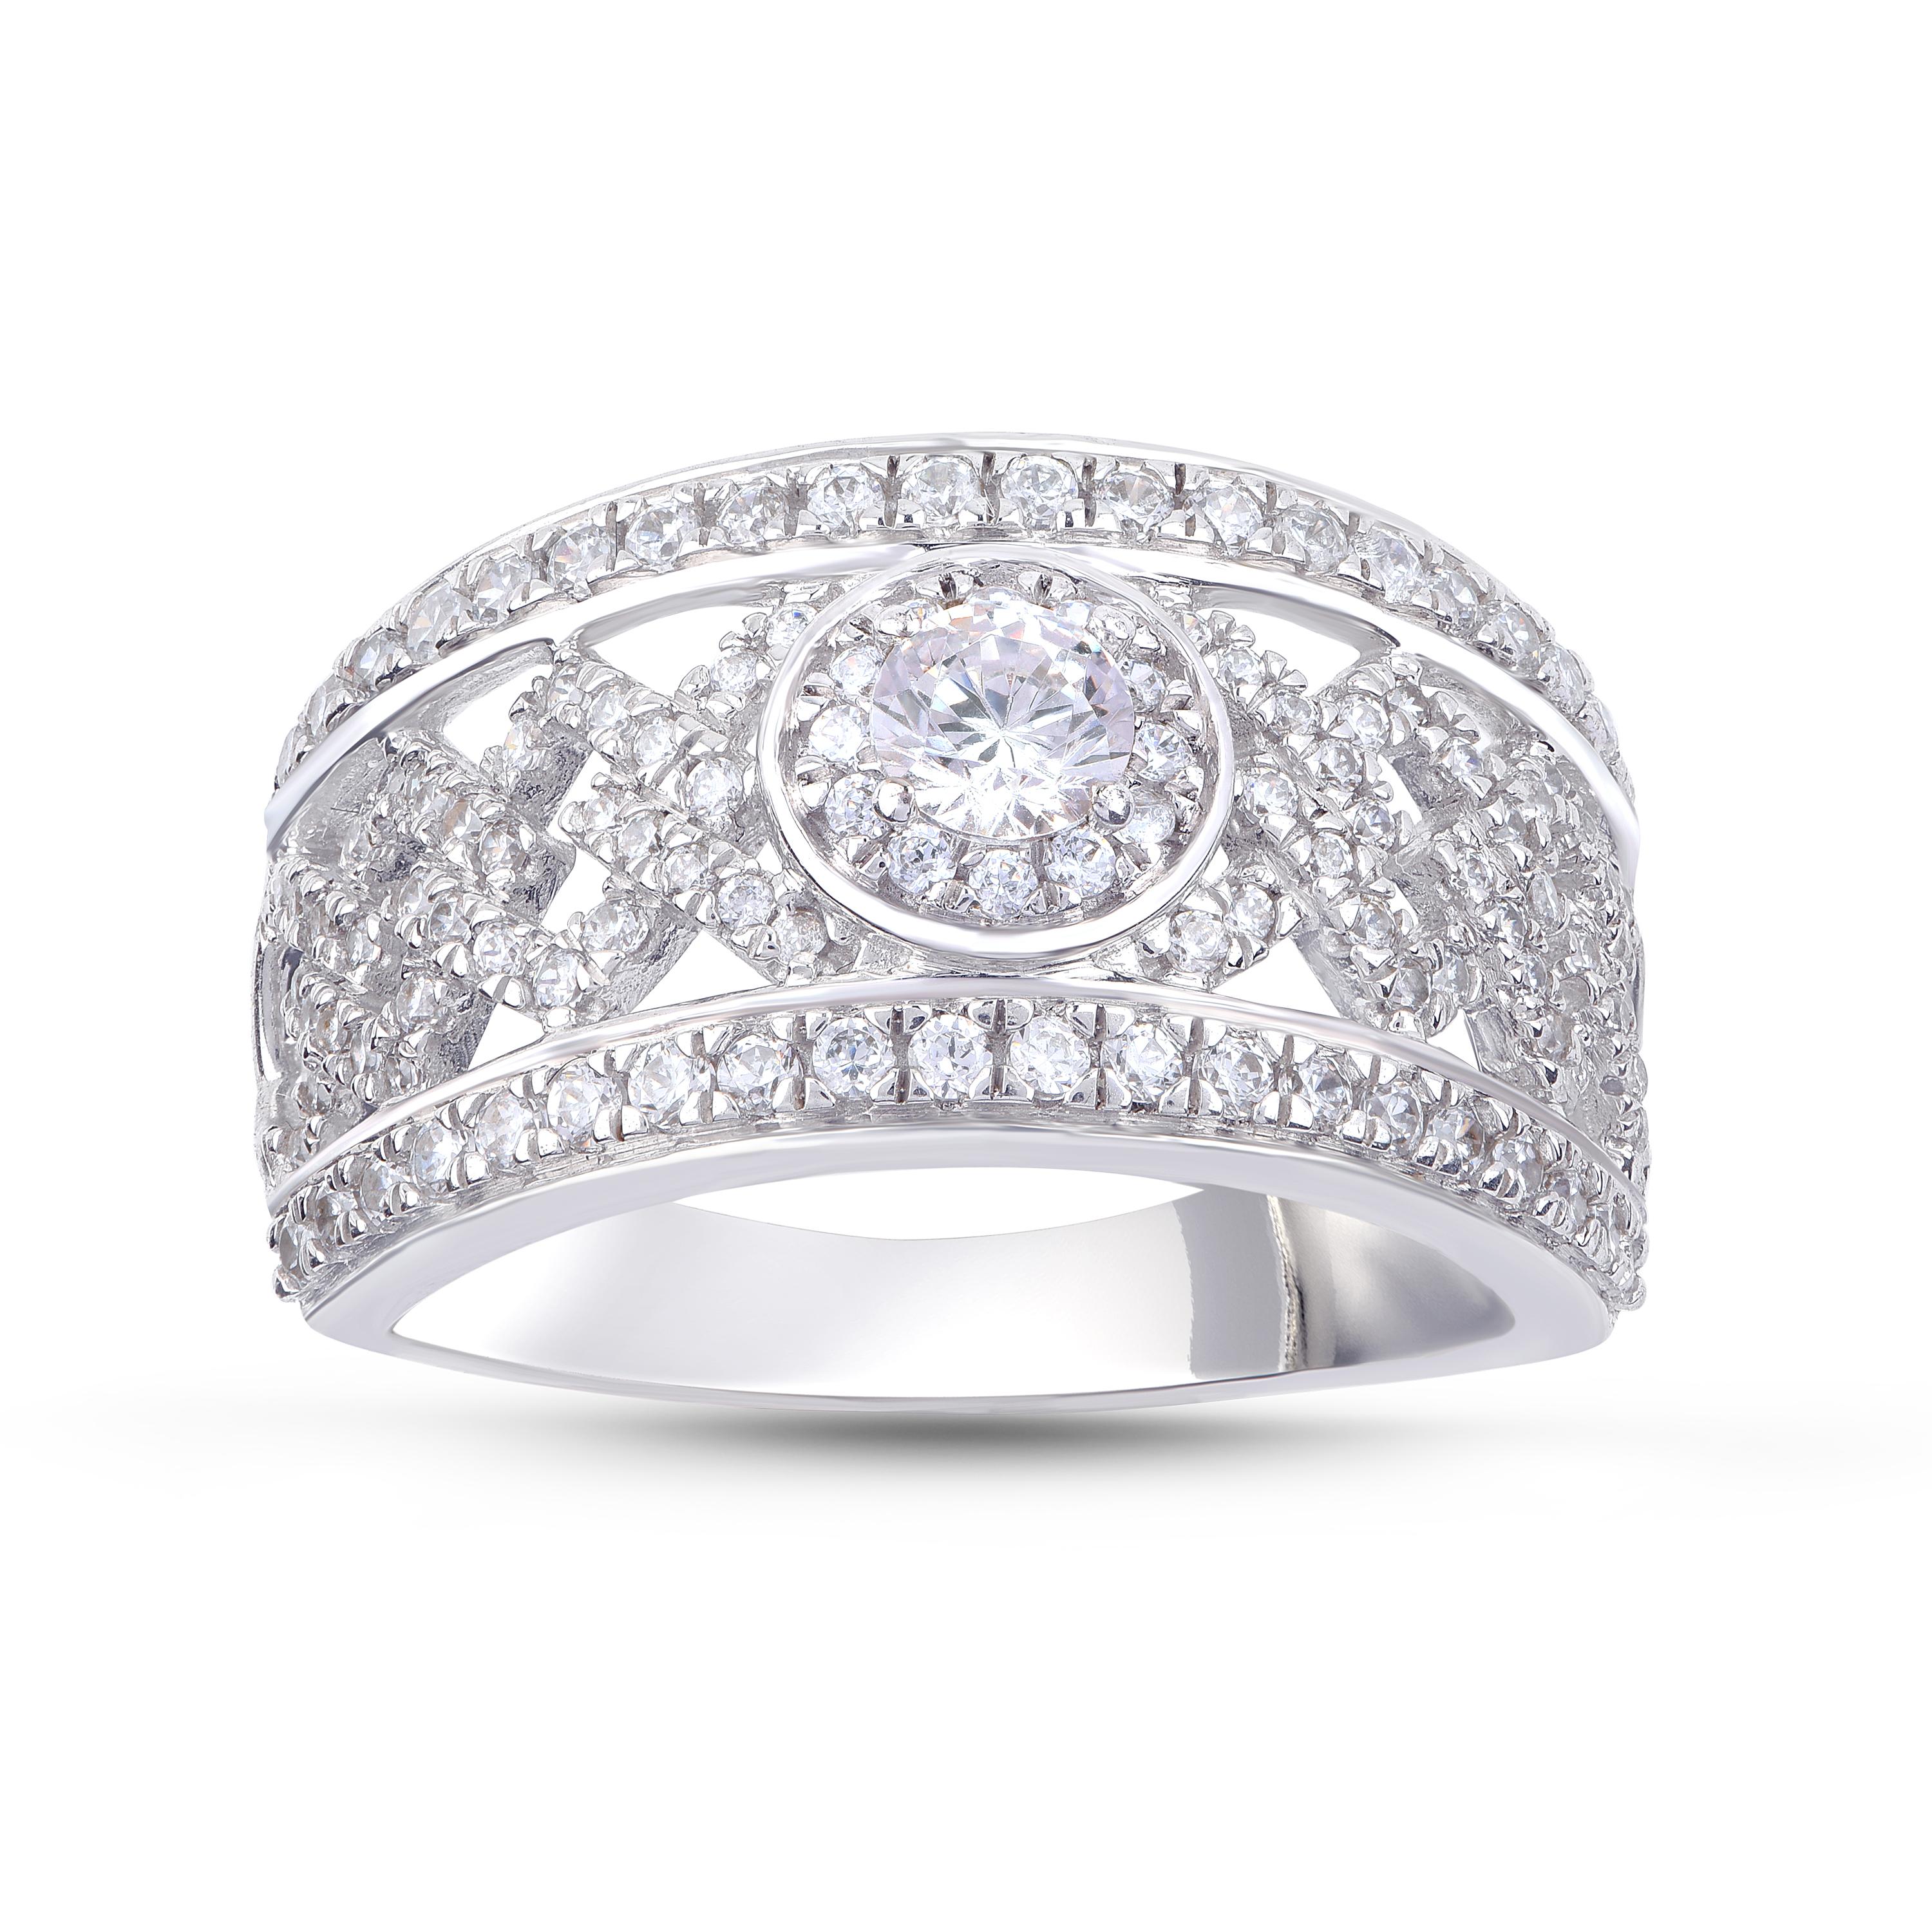 A flawless fusion of brilliant cut diamonds and white gold. The ring is handcrafted by our in-house experts in 18-karat white gold and studded with 123 brilliant diamond in prong and micro-prong setting. Diamonds are graded H Color, I1 Clarity.